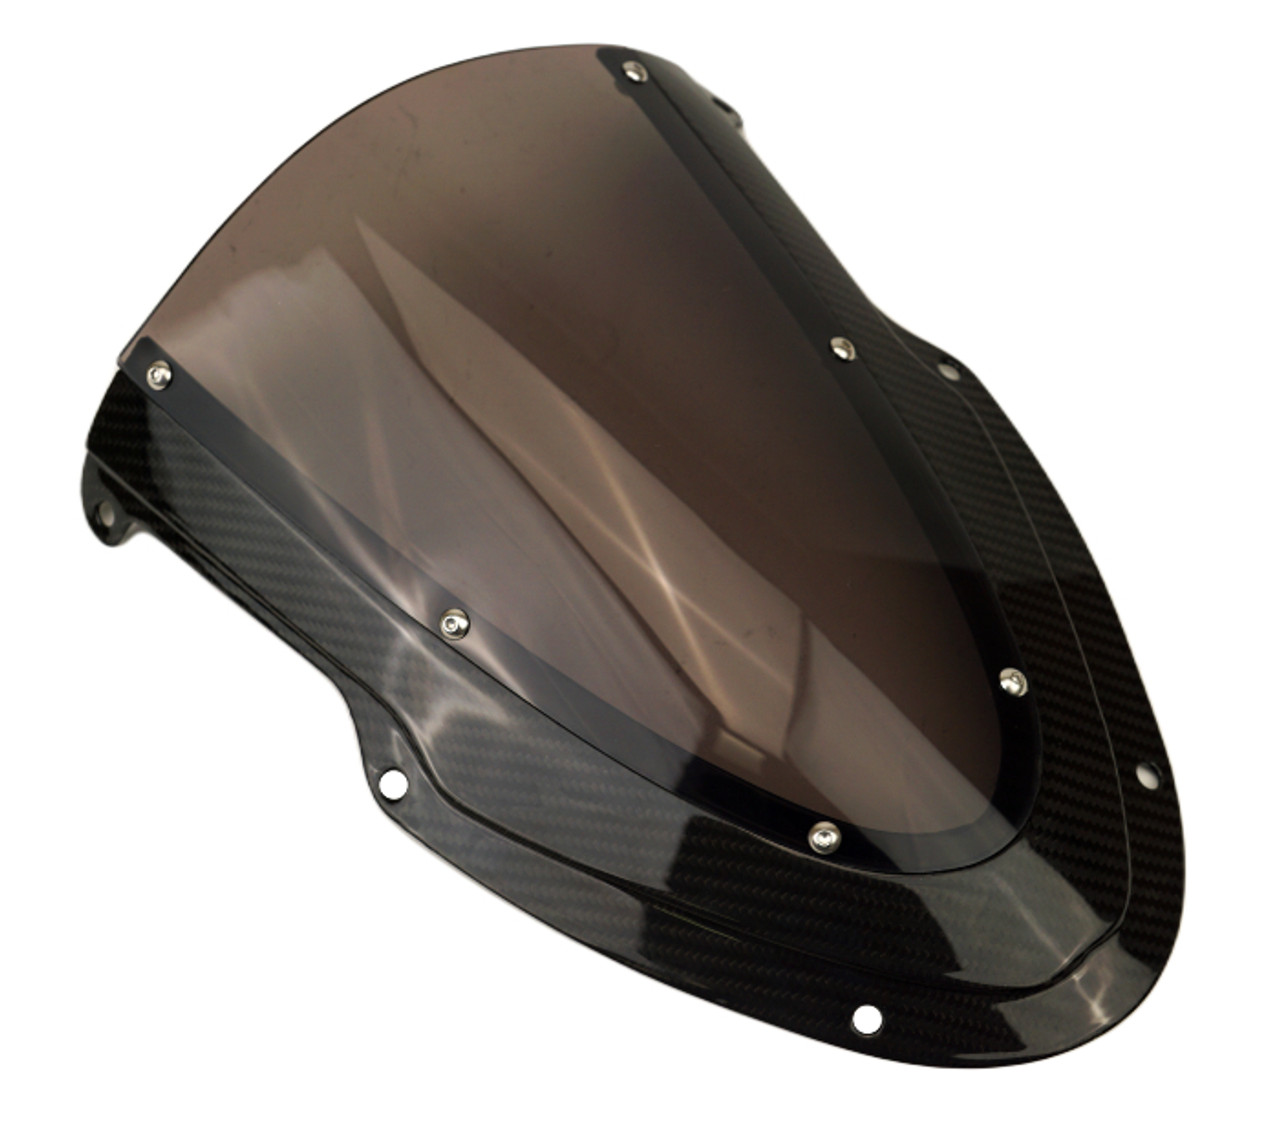 Windscreen (smoked screen) in Glossy Twill Weave Carbon Fiber for Honda CBR1000RR-R and SP 2020+ 

